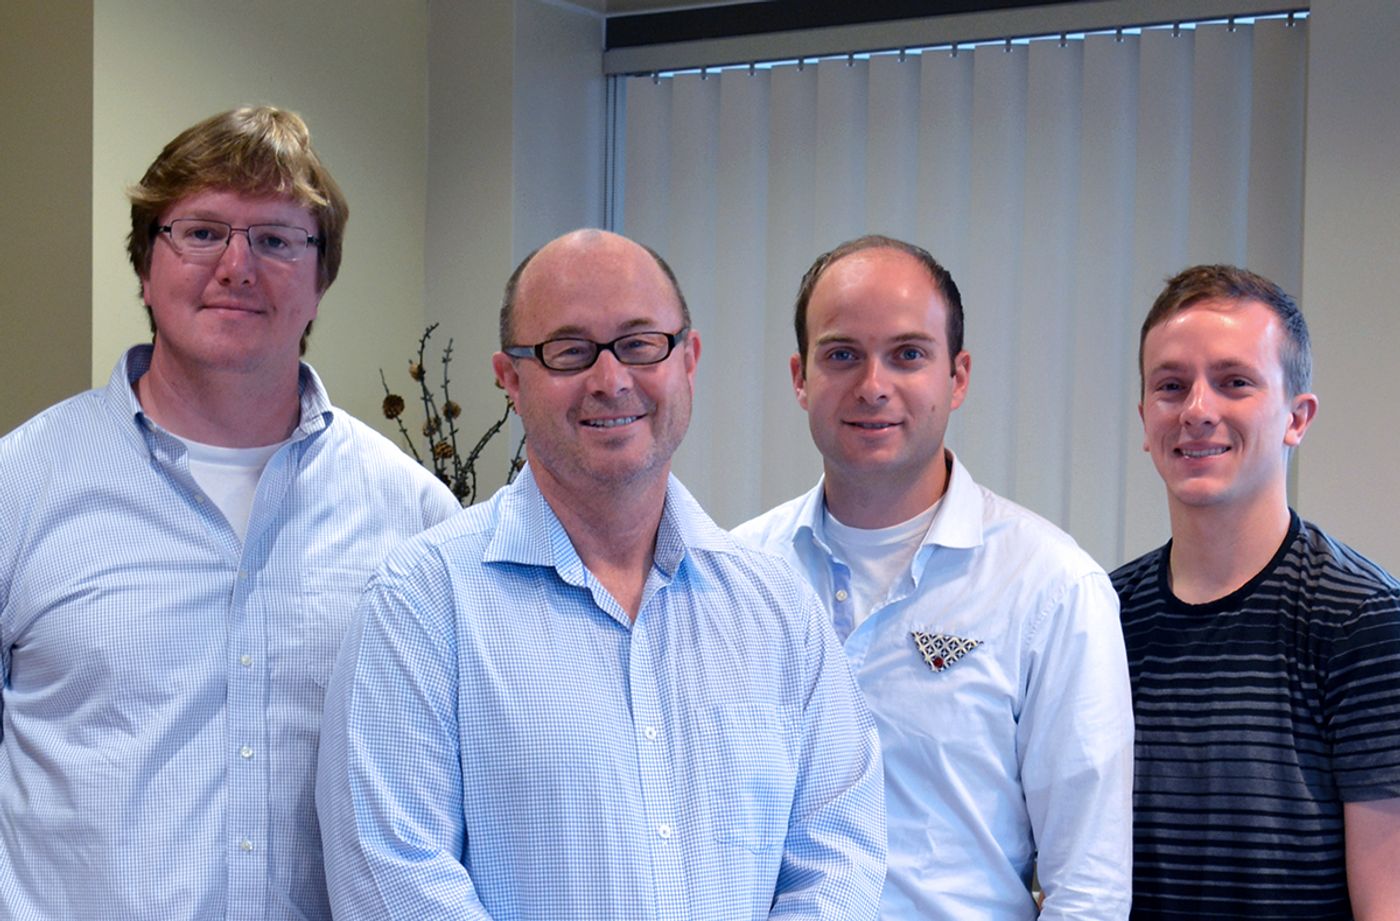 Authors of the new eLife study include (left to right) Luke Wiseman, Jeffery Kelly, Lars Plate and Ryan Paxman of The Scripps Research Institute.